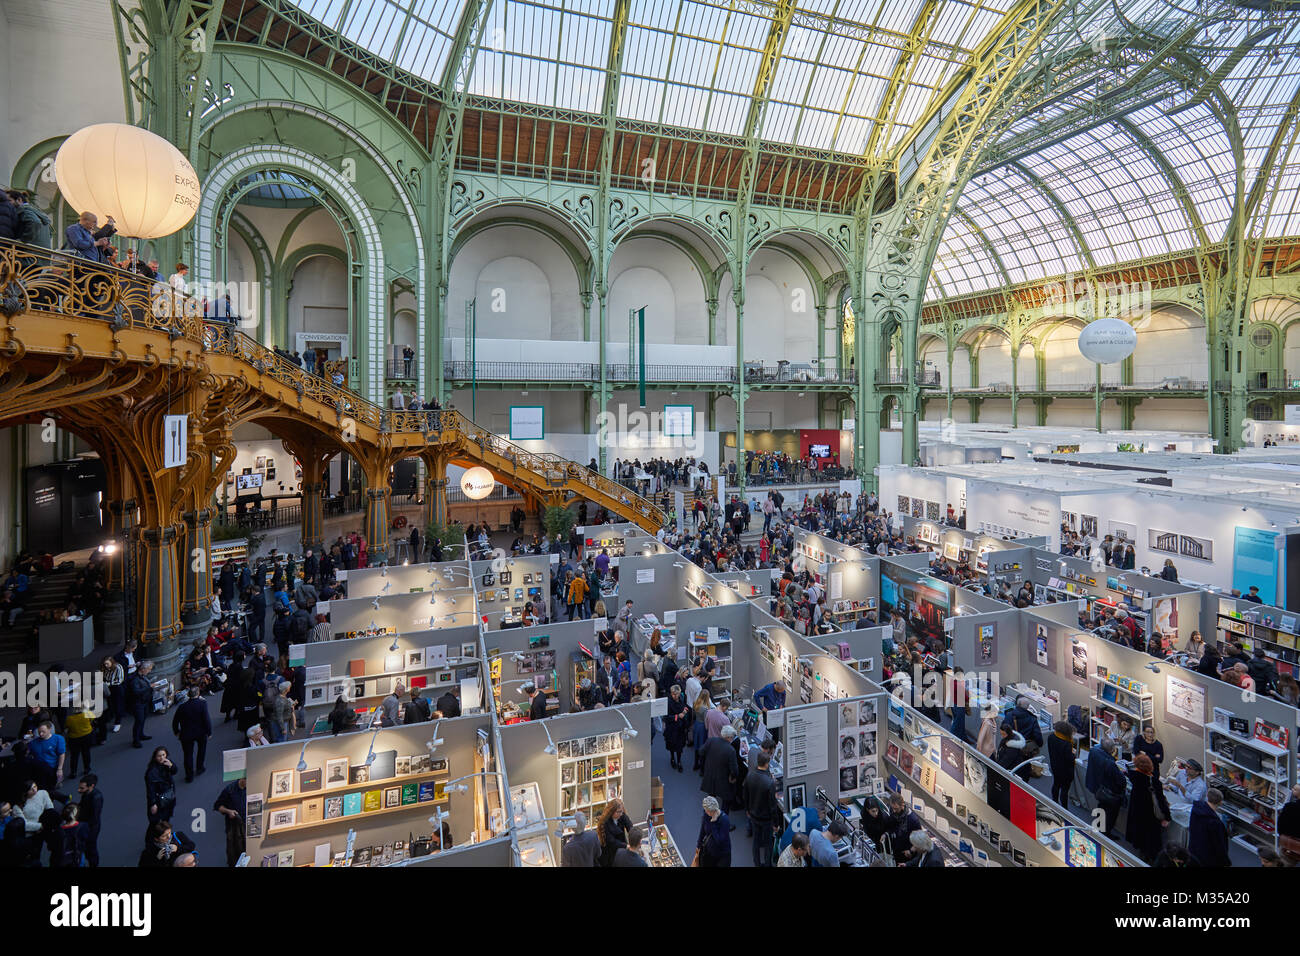 PARIS - NOVEMBER 10: Paris Photo art fair high angle view with people, terrace and bookshop area at Grand Palais on November 10, 2017 in Paris, France Stock Photo